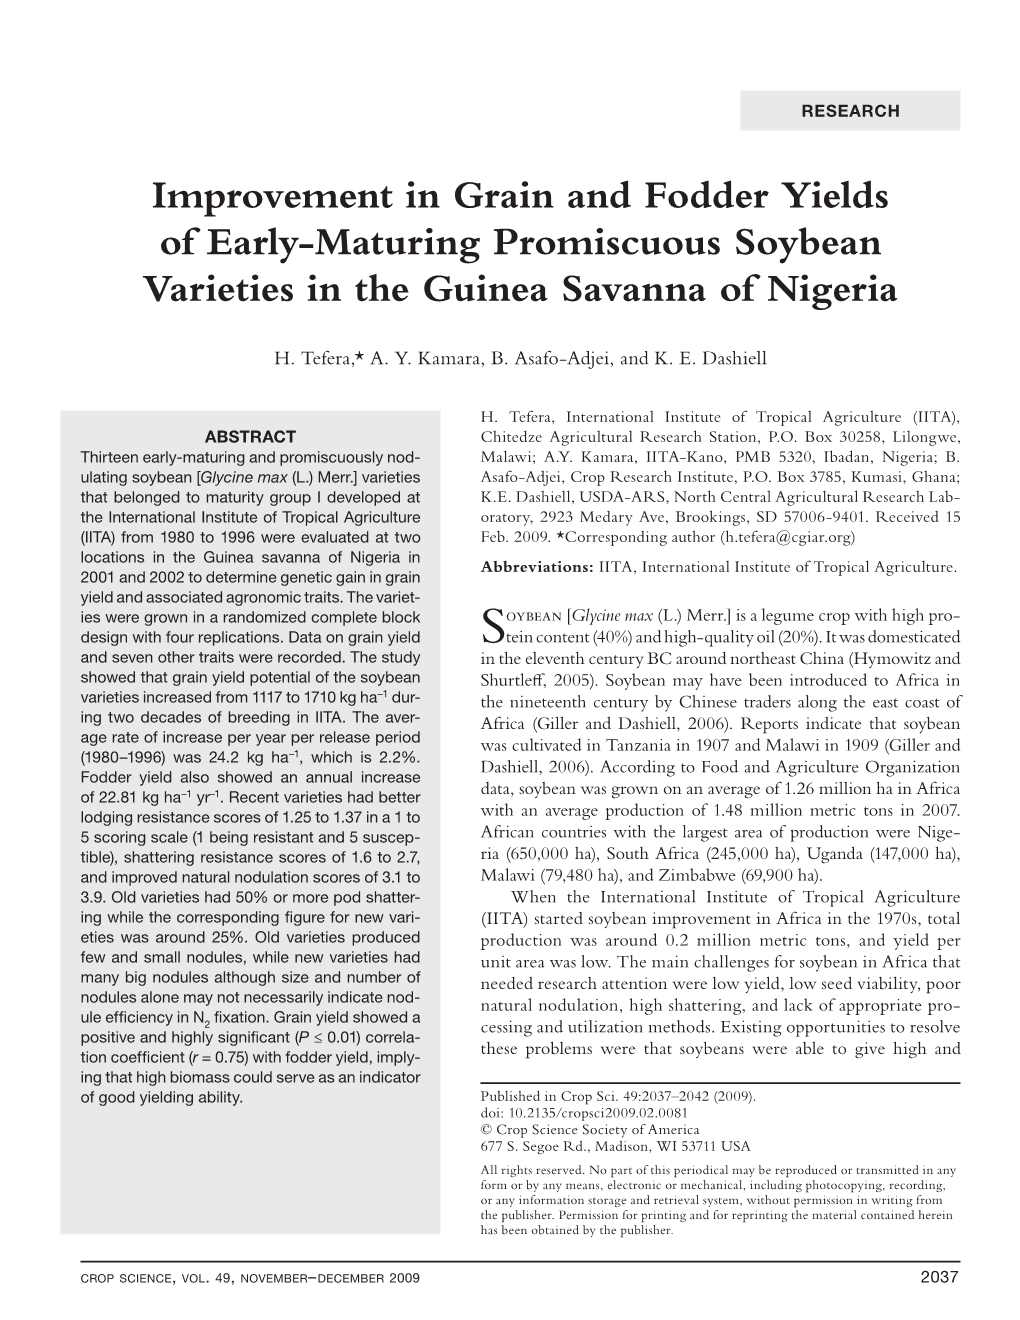 Improvement in Grain and Fodder Yields of Early-Maturing Promiscuous Soybean Varieties in the Guinea Savanna of Nigeria